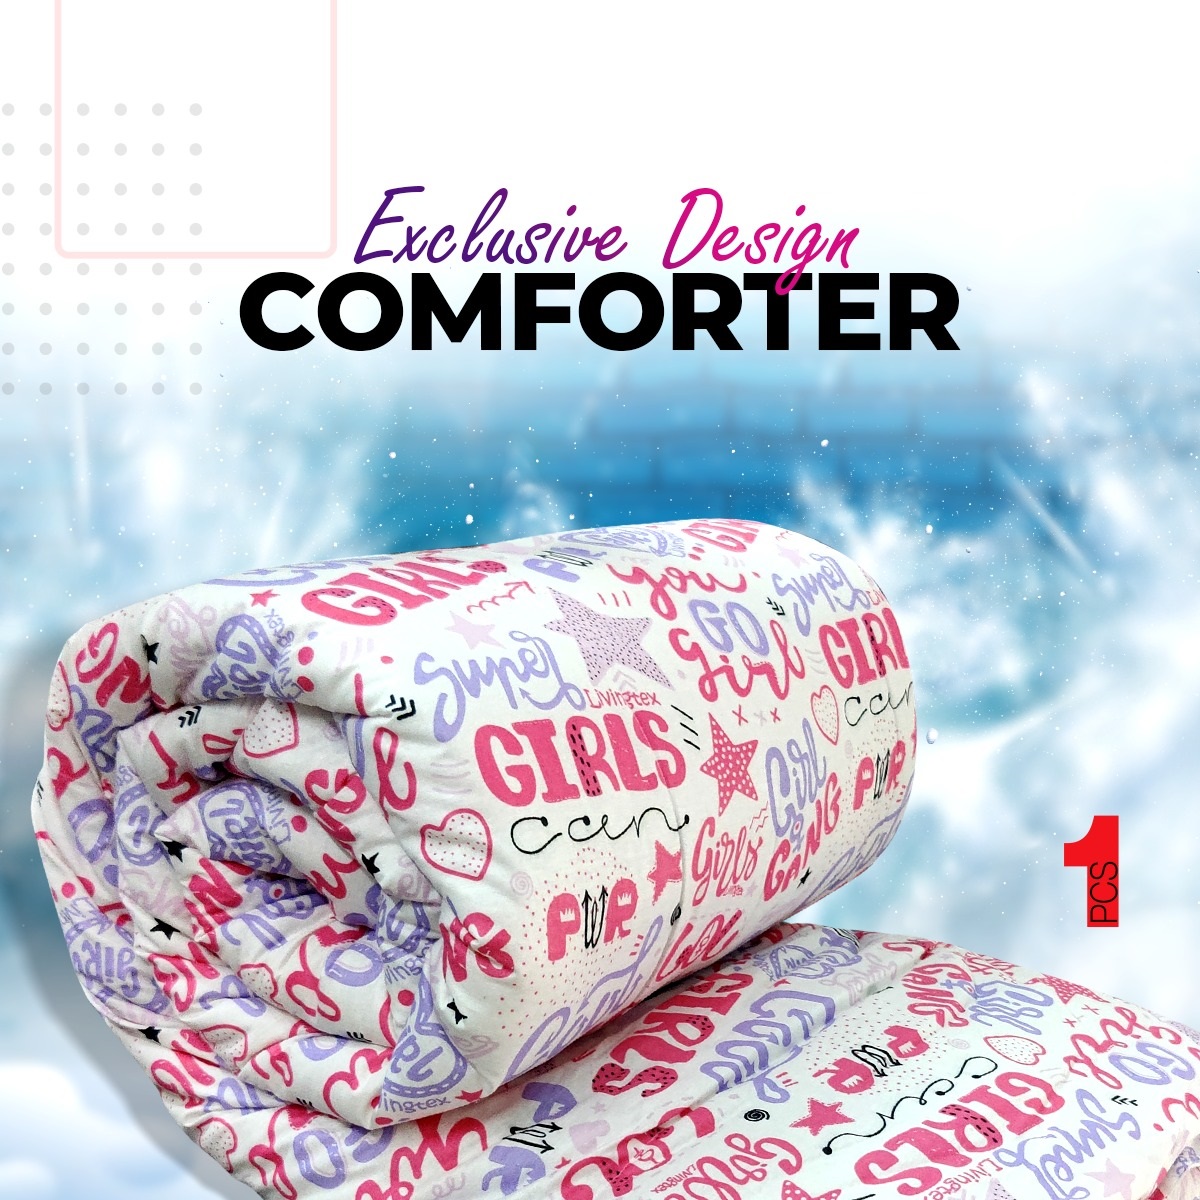 King Size Comforter Cotton Outside Fiber Filler Inside Too Warmth Perfect For Winter - LC002